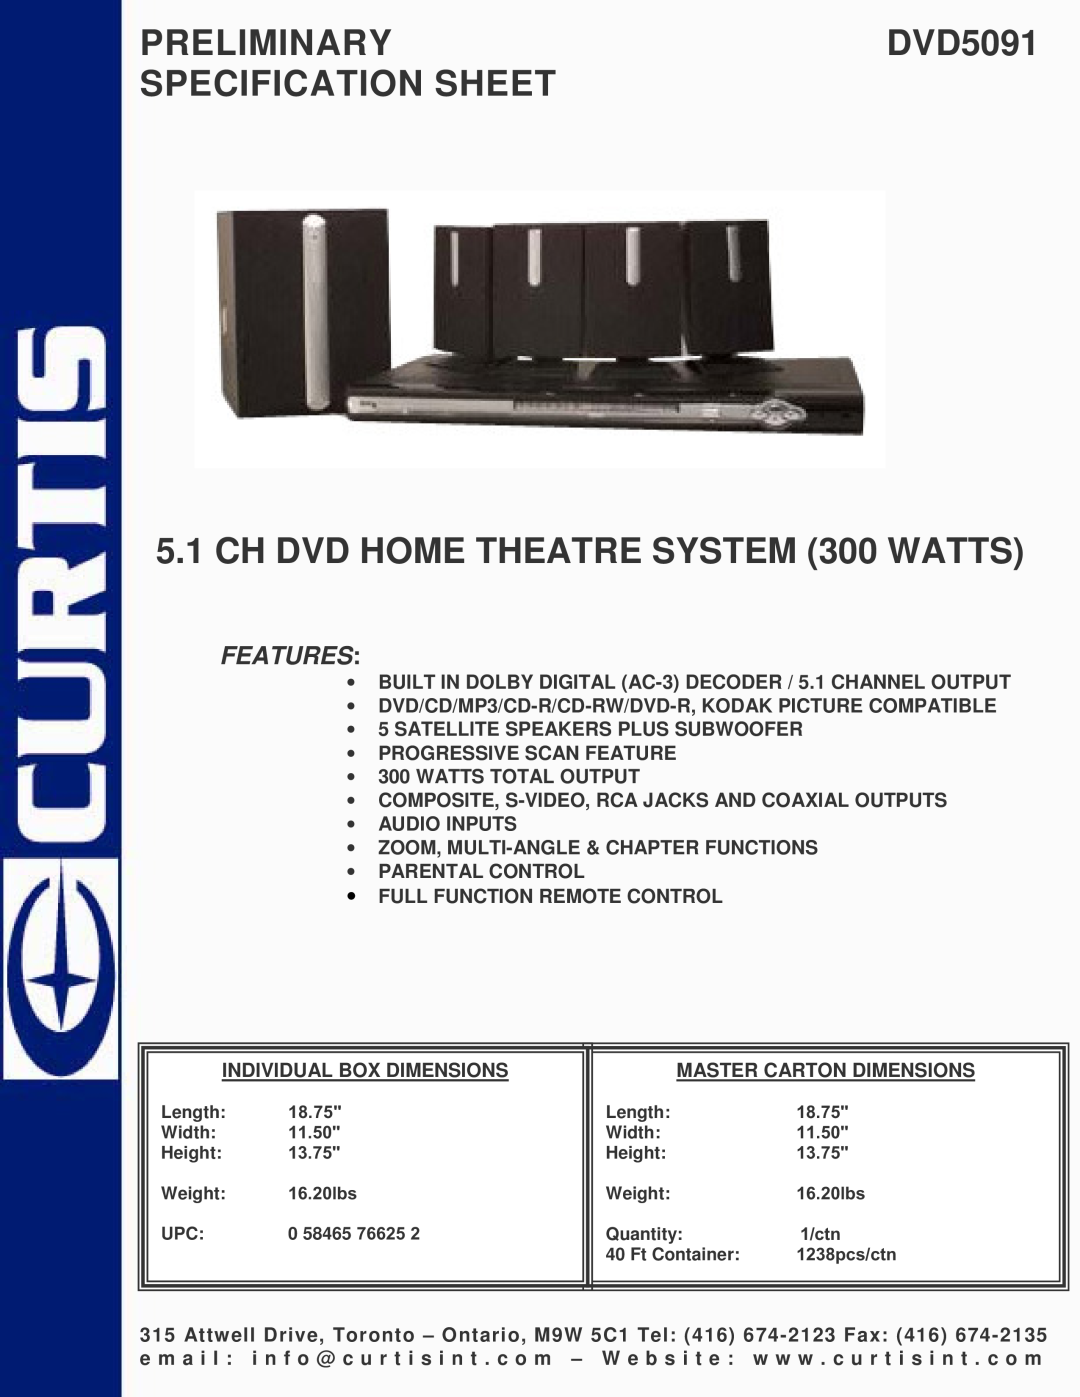 Curtis specifications PRELIMINARYDVD5091 SPECIFICATION SHEET, CH DVD HOME THEATRE SYSTEM 300 WATTS, Features 